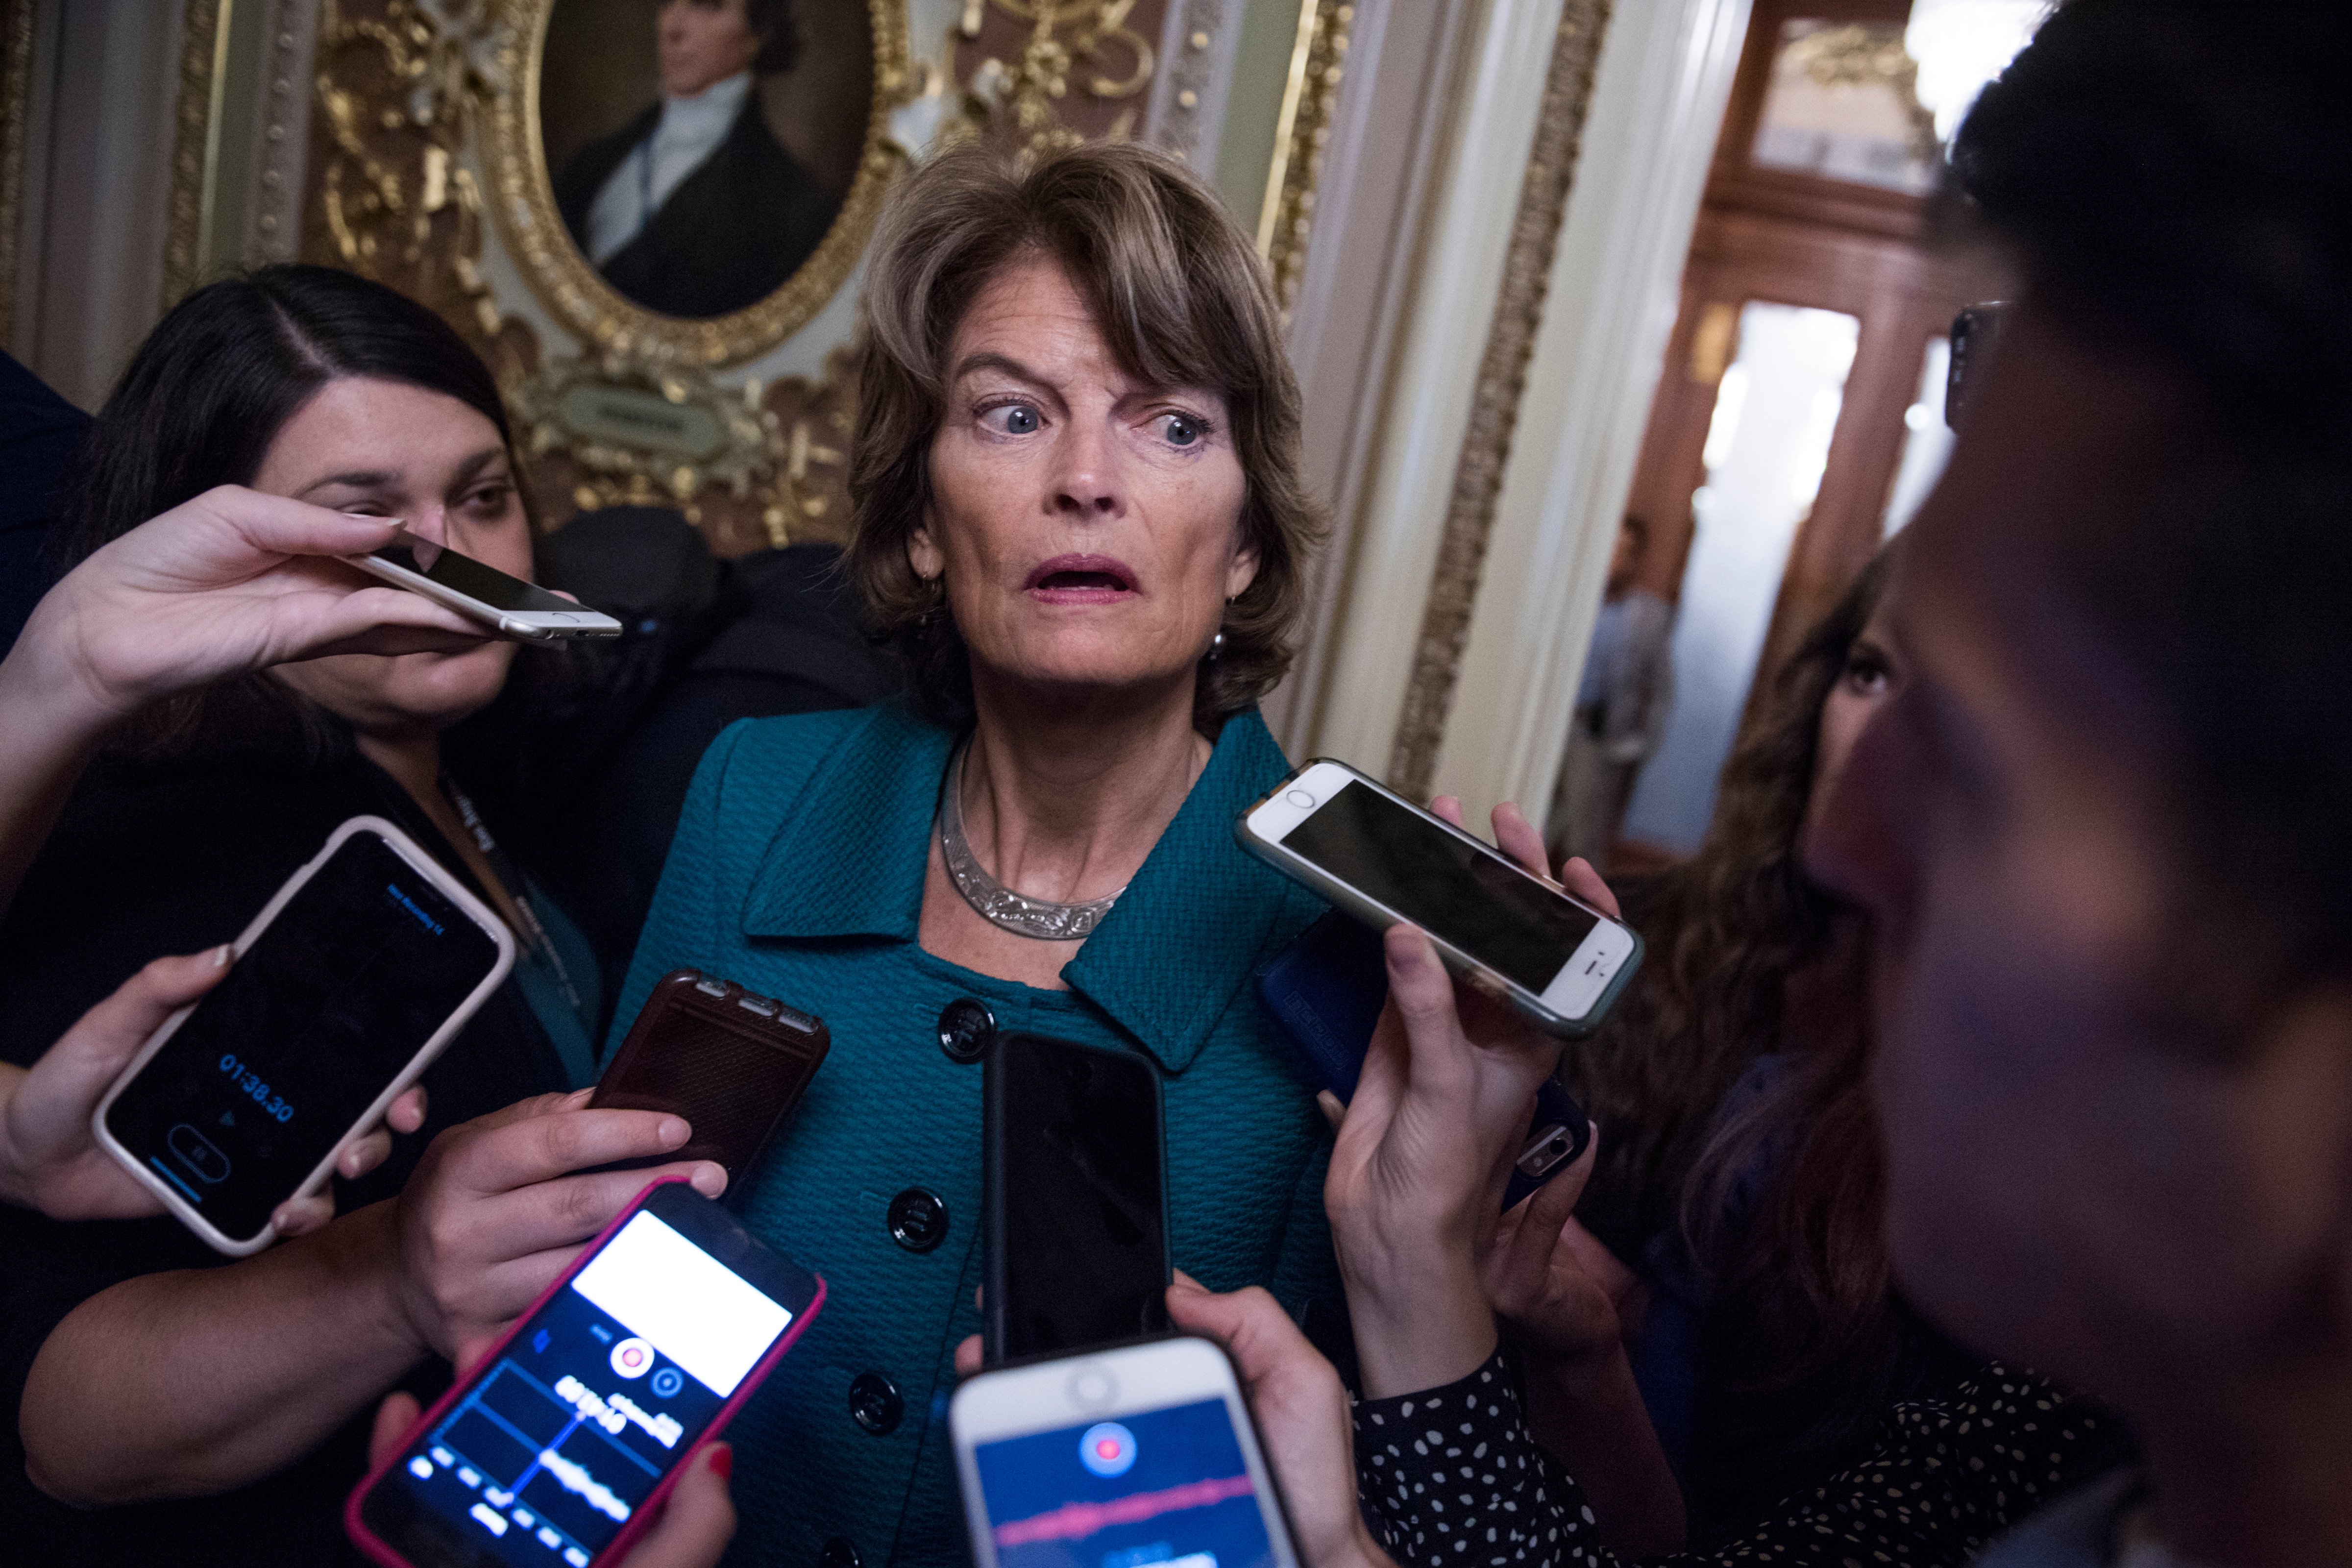 Alaska Sen. Lisa Murkowski talks with the media in the Capitol after voting "no" on a cloture that advanced the Supreme Court nomination of Brett Kavanaugh to a final vote on Oct. 5, 2018. (Tom Williams—CQ-Roll Call/Getty Images)